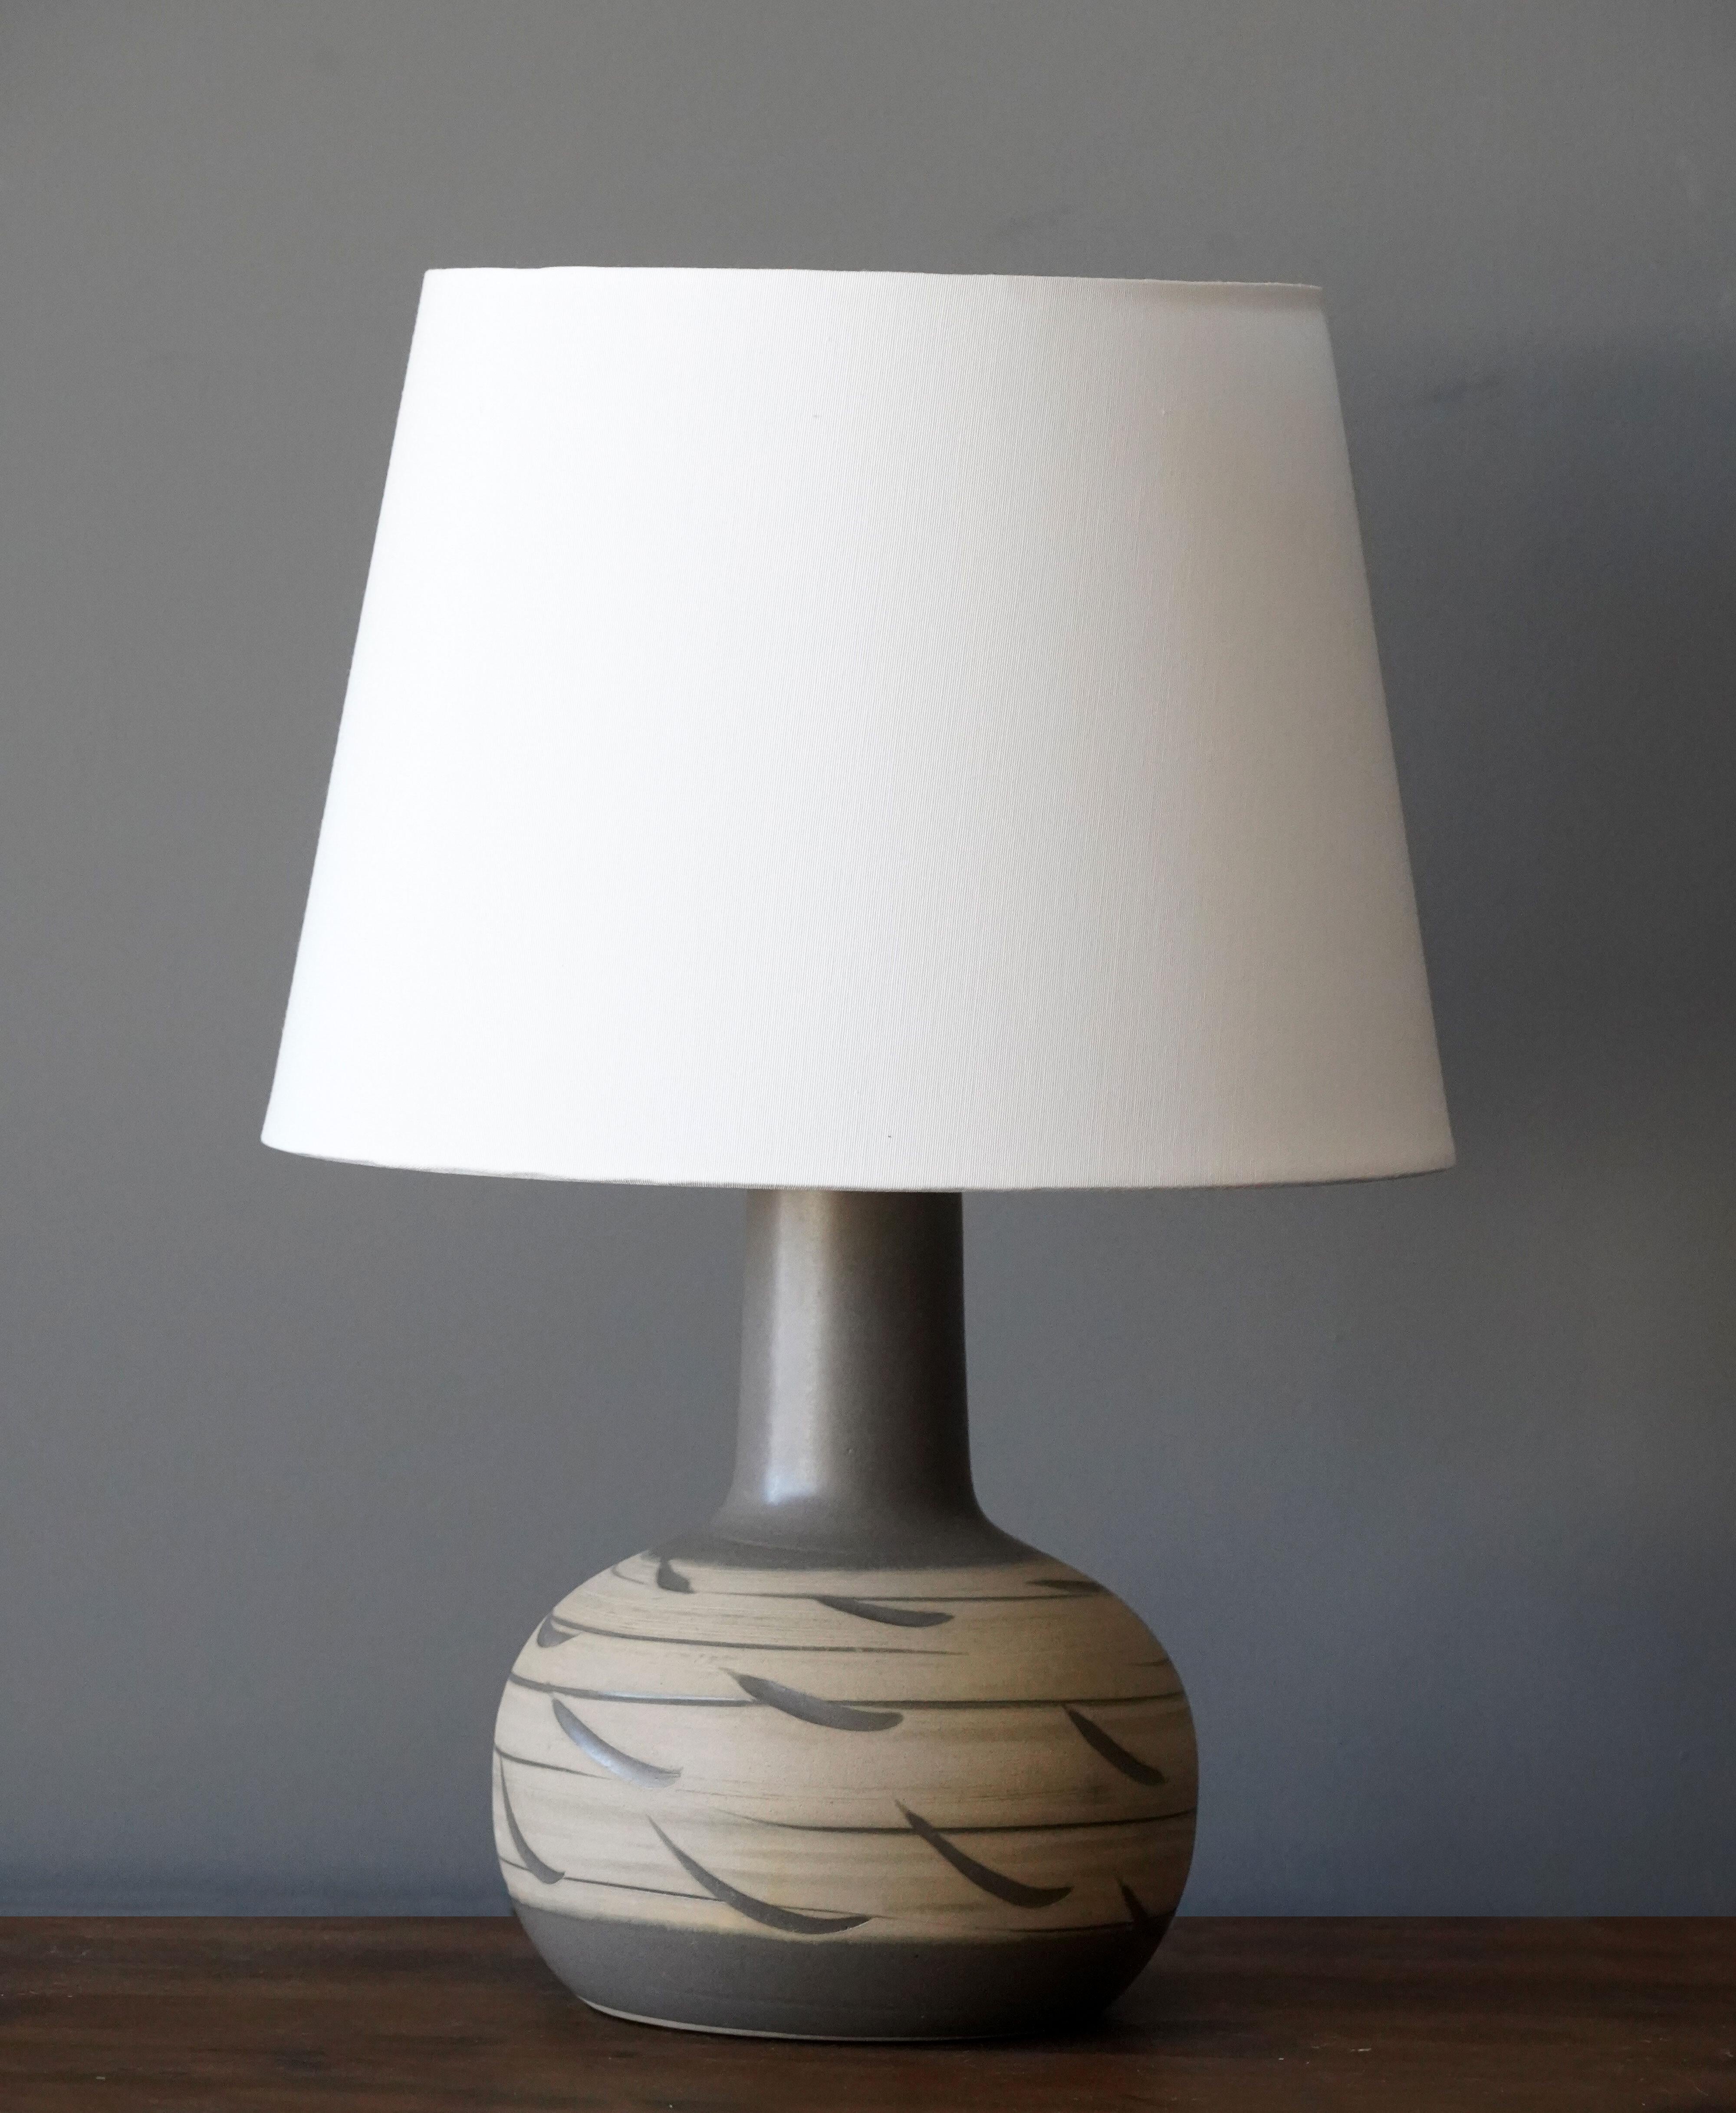 A table lamp designed by husband and wife duo Jane & Gordon Martz. Produced by Marshall Studios, Indianapolis. 

The base is slip-cast and then dipped into glaze and hand painted. Base is signed.

Jane & Gordon Martz works are represented in the